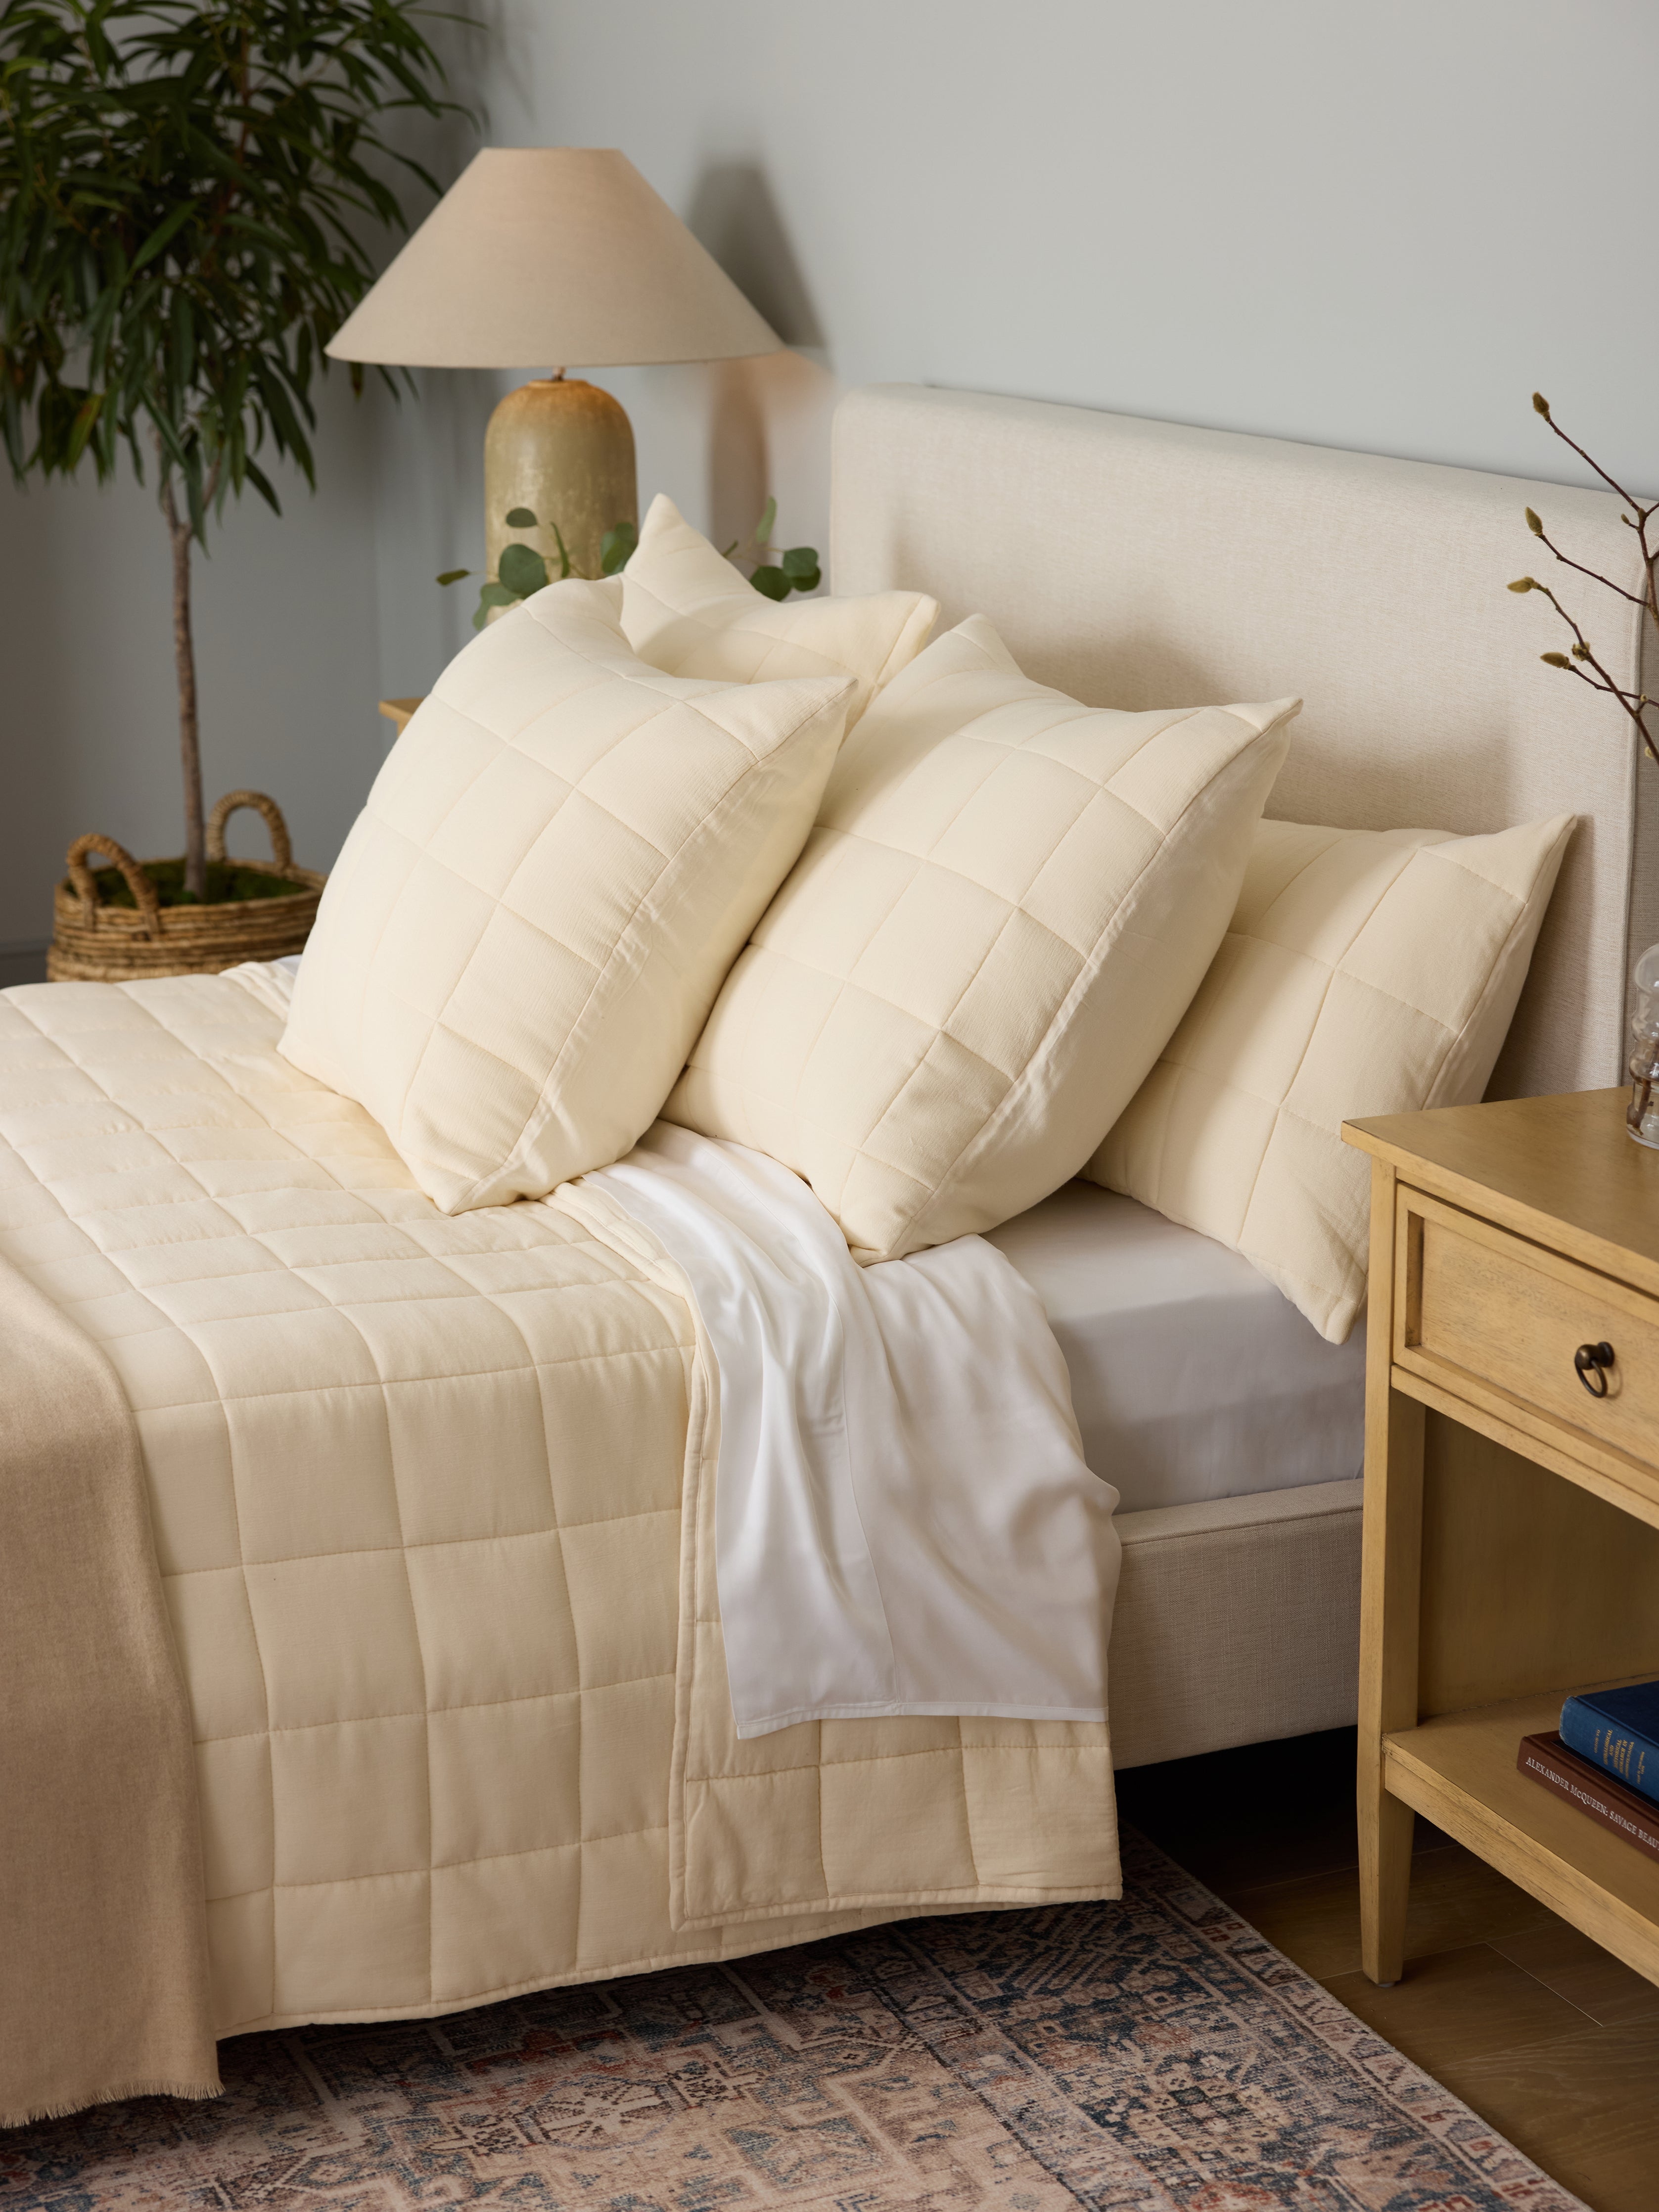 Buttermilk Aire Bamboo Box Quilt Euro Sham. The sham is resting on a bed in a bedroom|Color:Buttermilk|Size:King